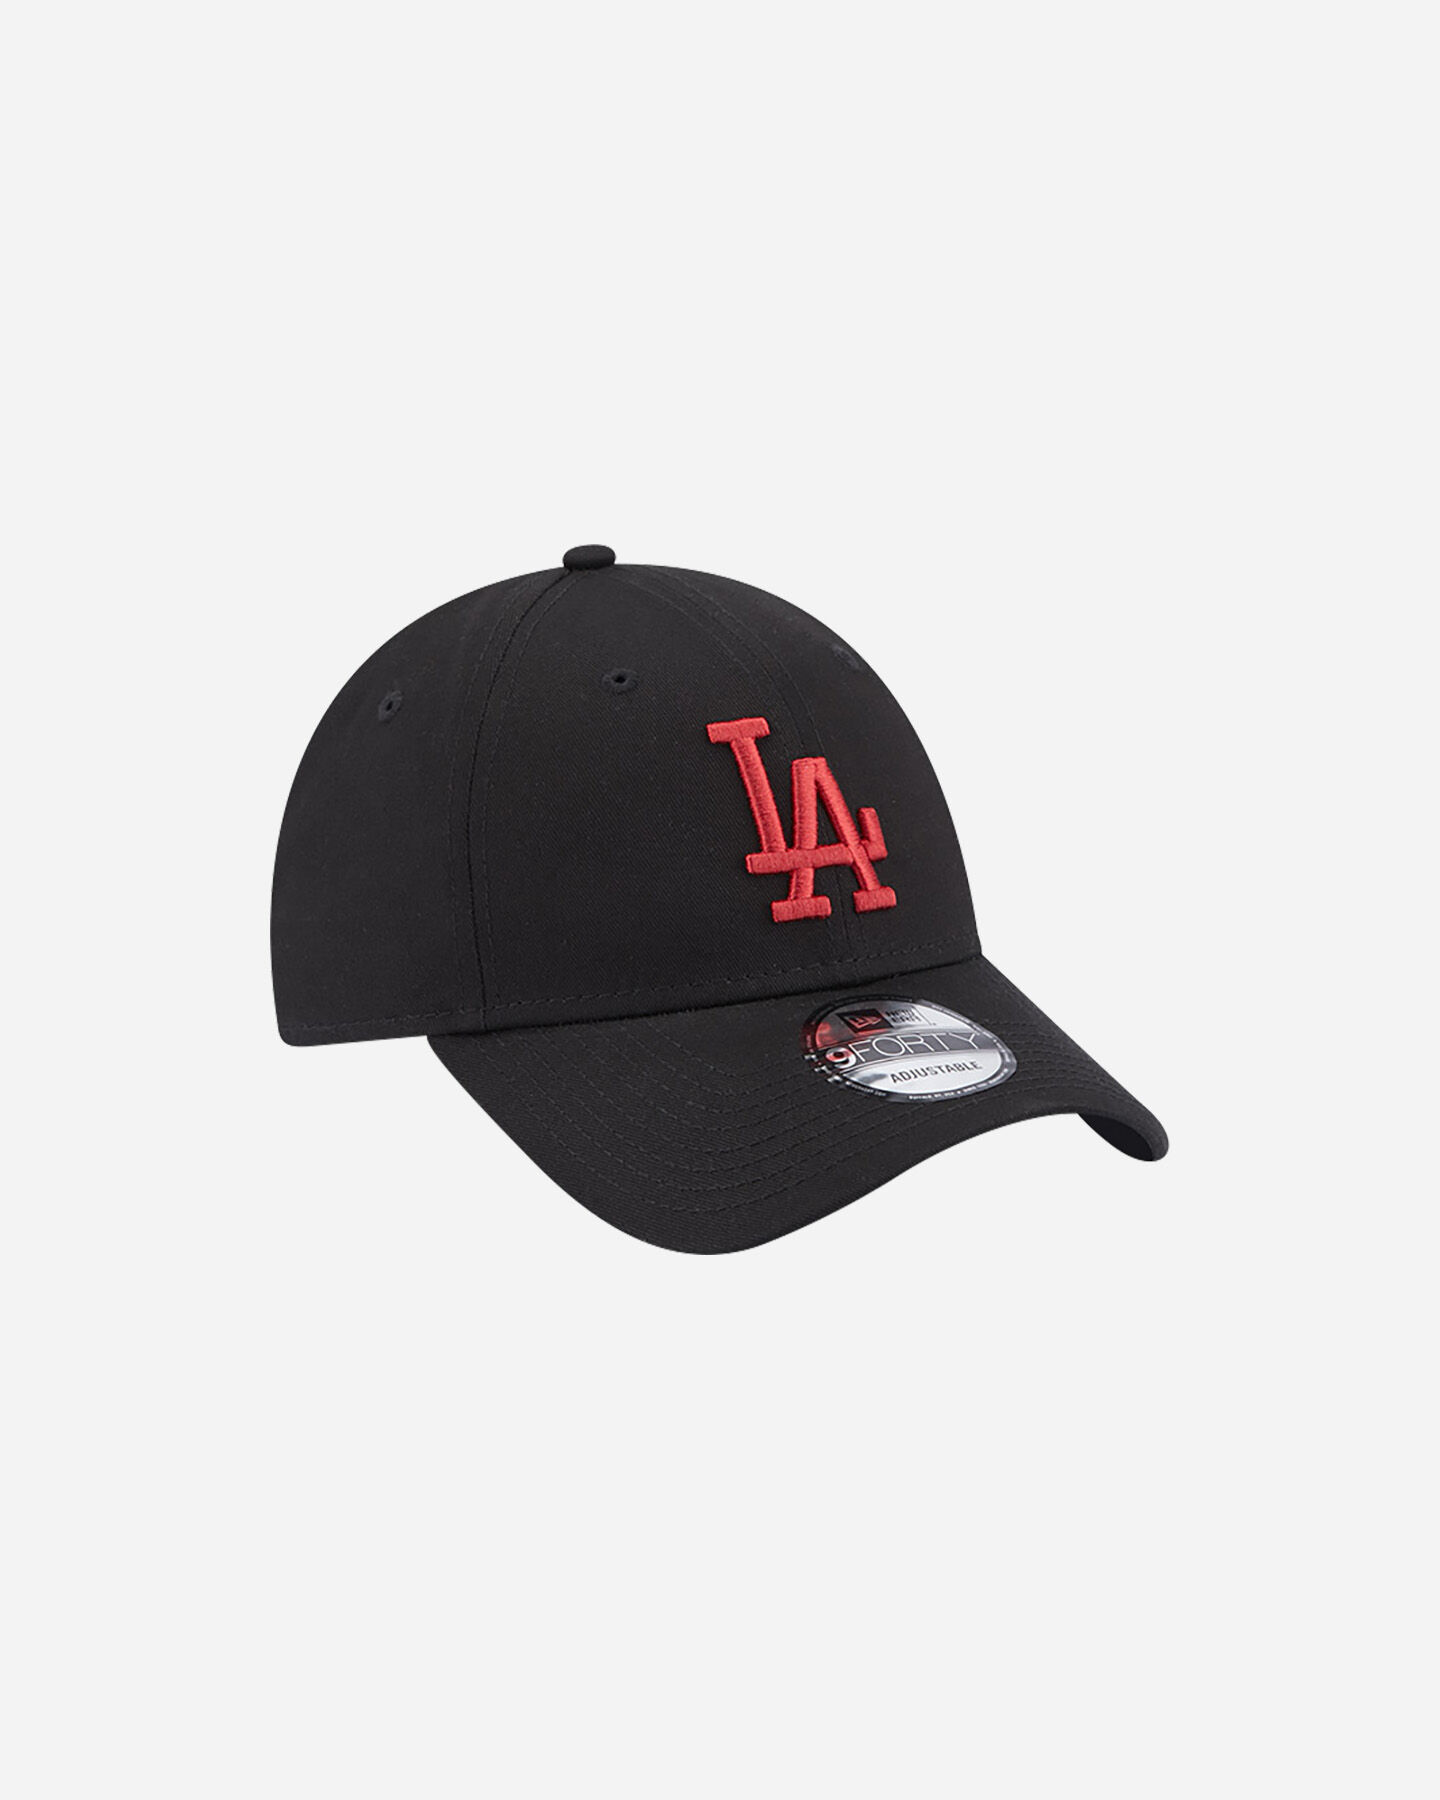  Cappellino NEW ERA 9FORTY MLB LEAGUE LOS ANGELES DODGERS  S5606276|001|OSFM scatto 2